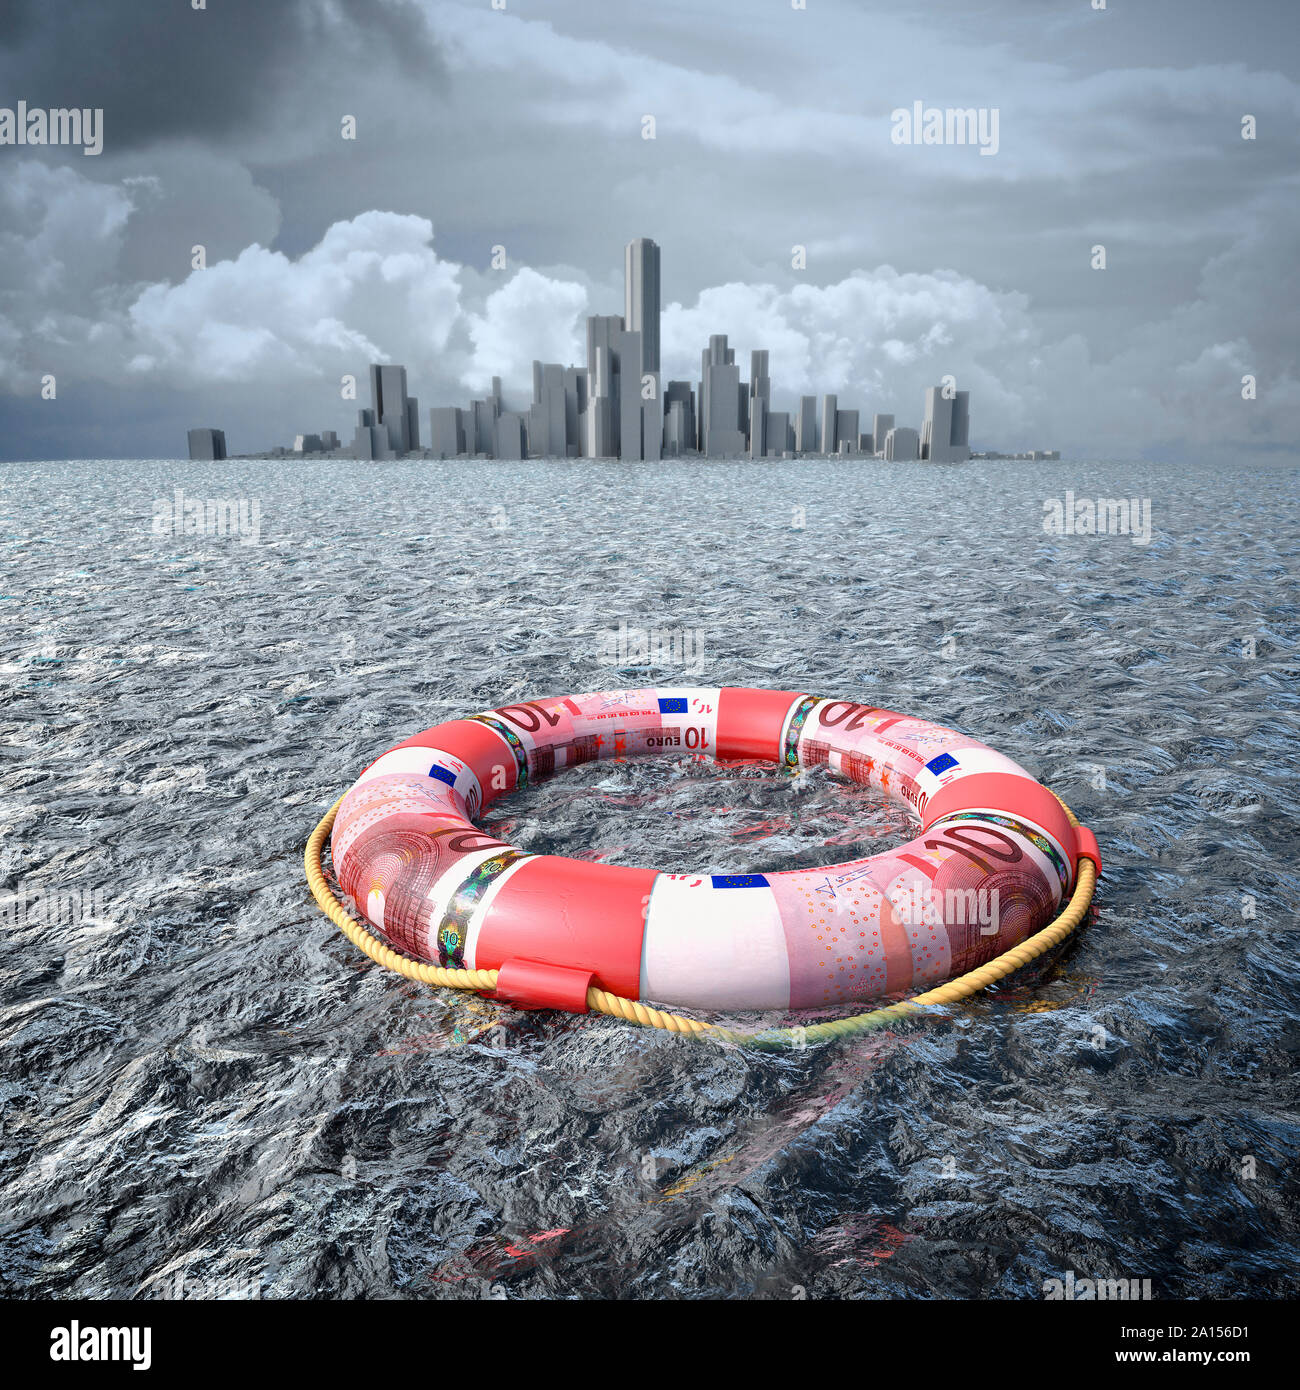 Lifebelt, life ring preserver made of Euros currency drifting on the ocean in front of a city Stock Photo